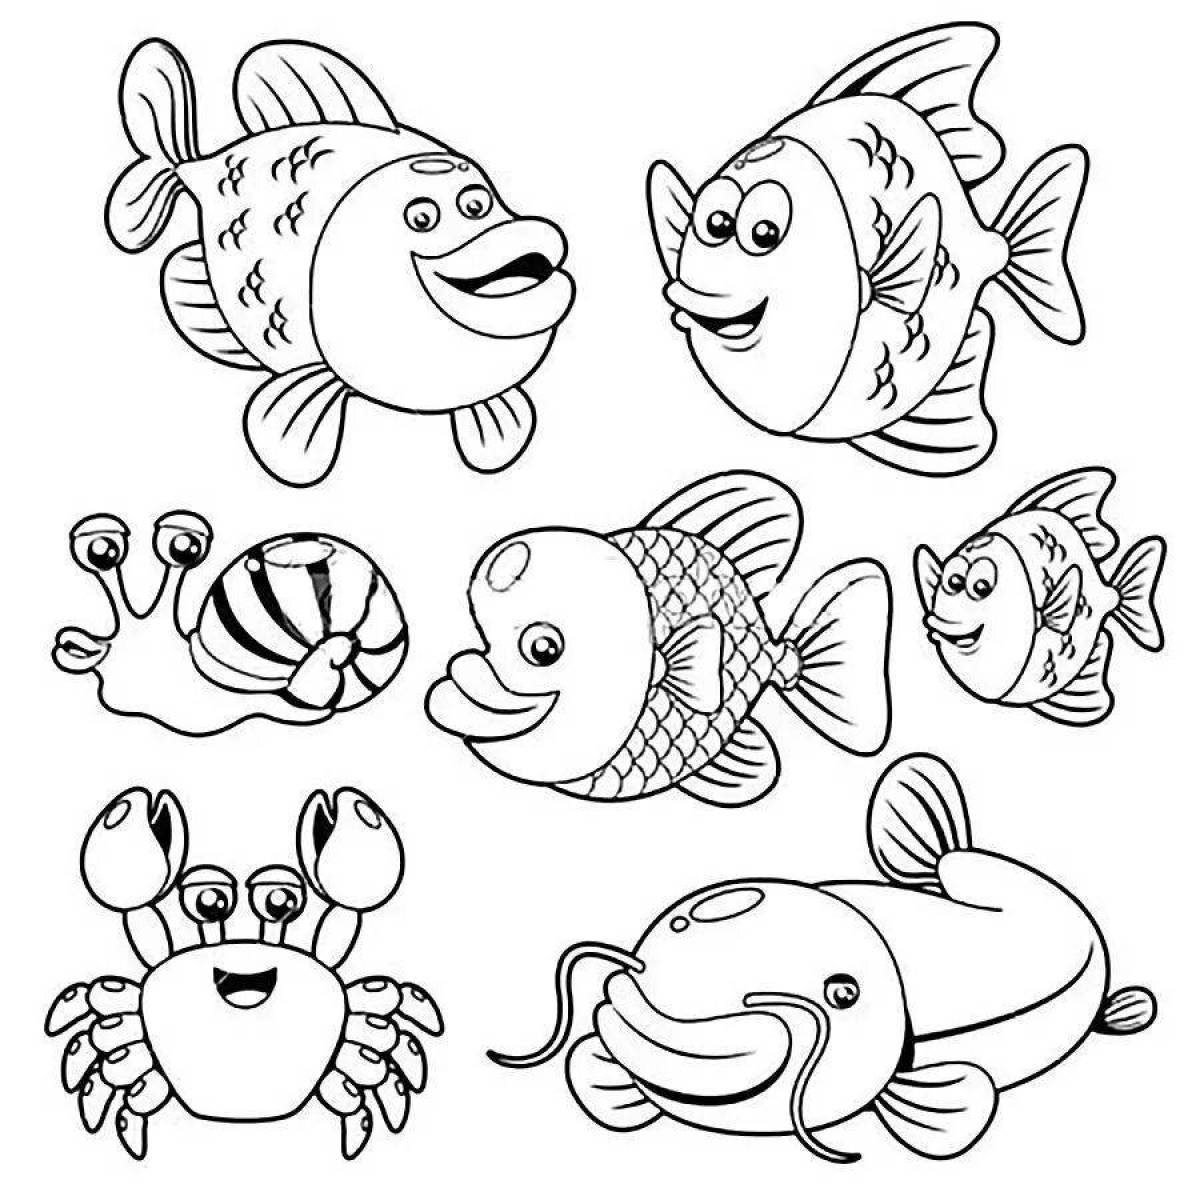 Outstanding fish coloring page